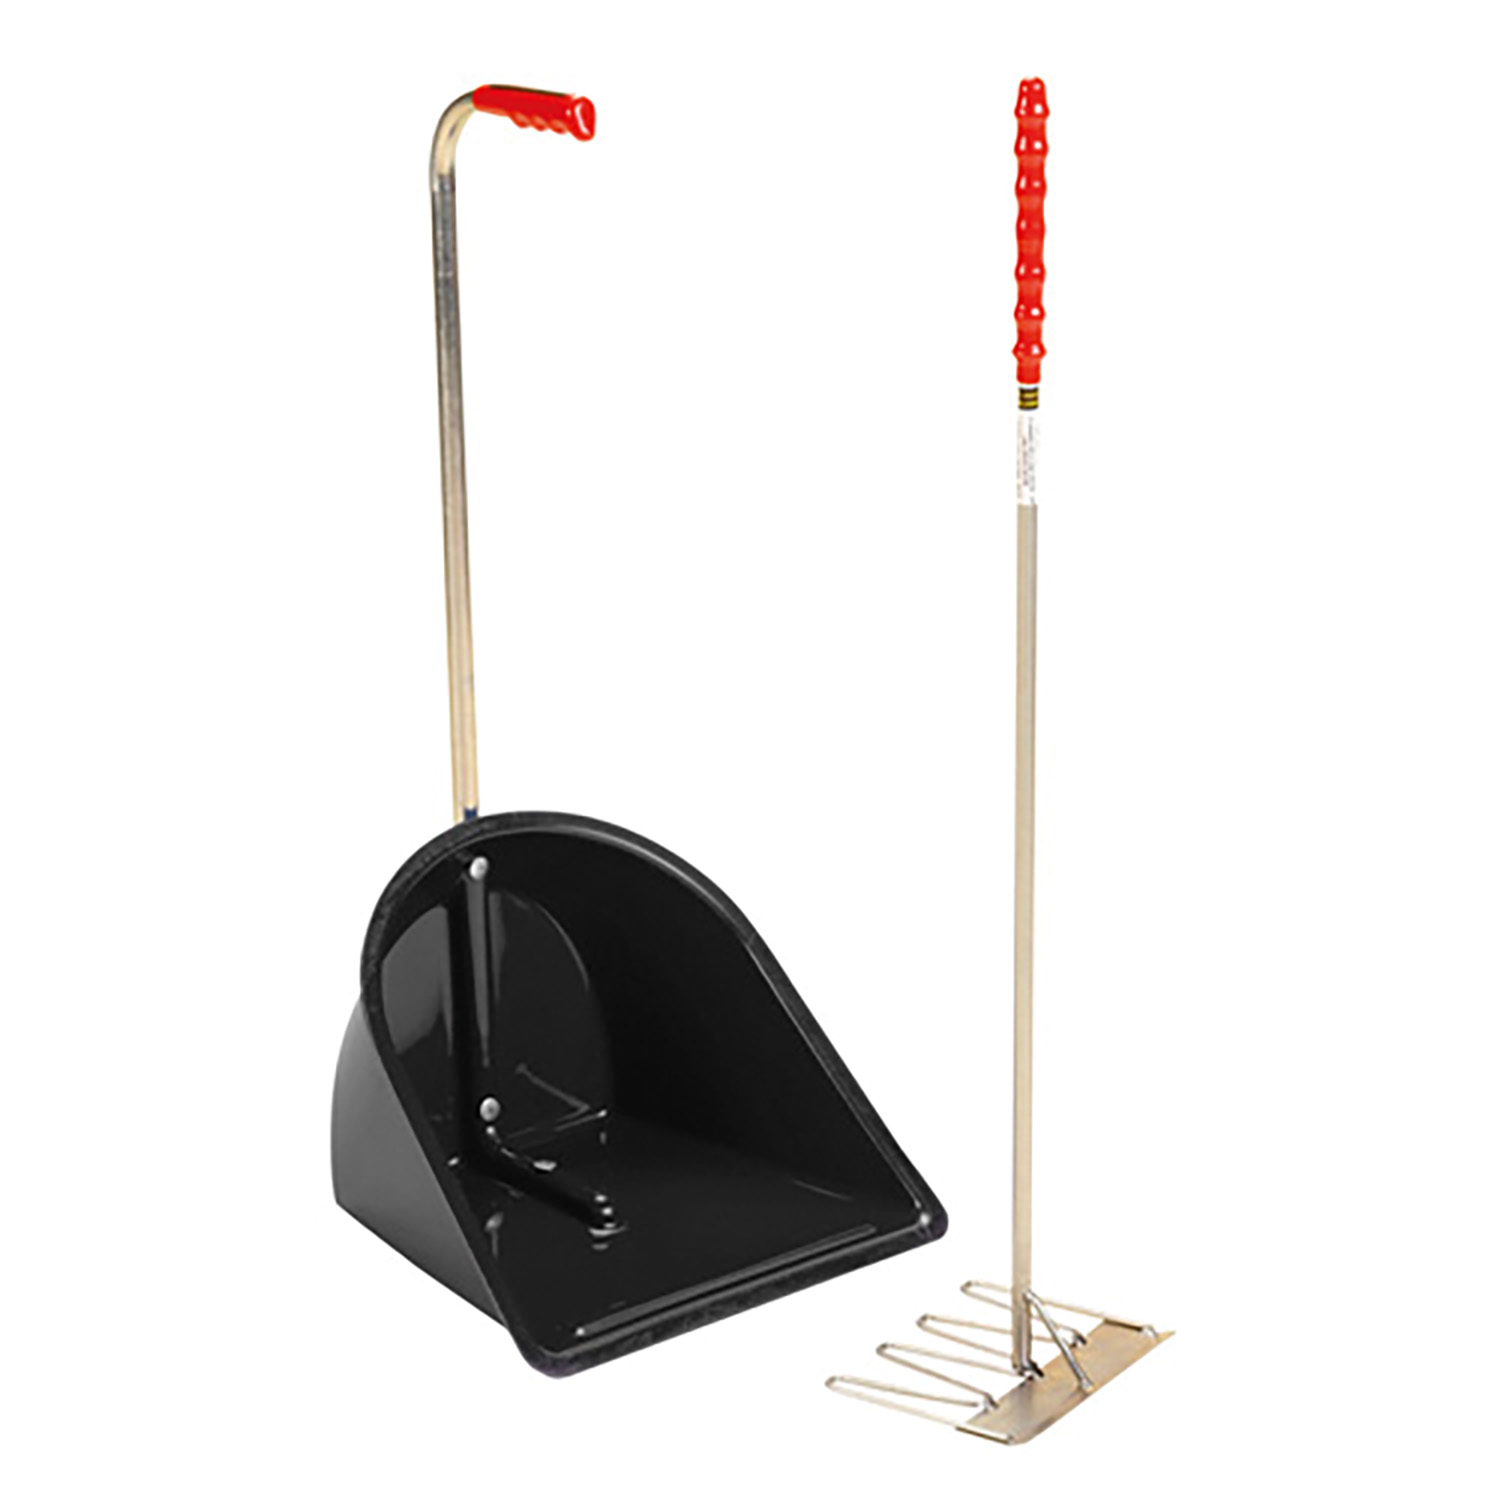 STUBBS STABLE MATE MANURE COLLECTOR HIGH C/W RAKE S4585 BLACK